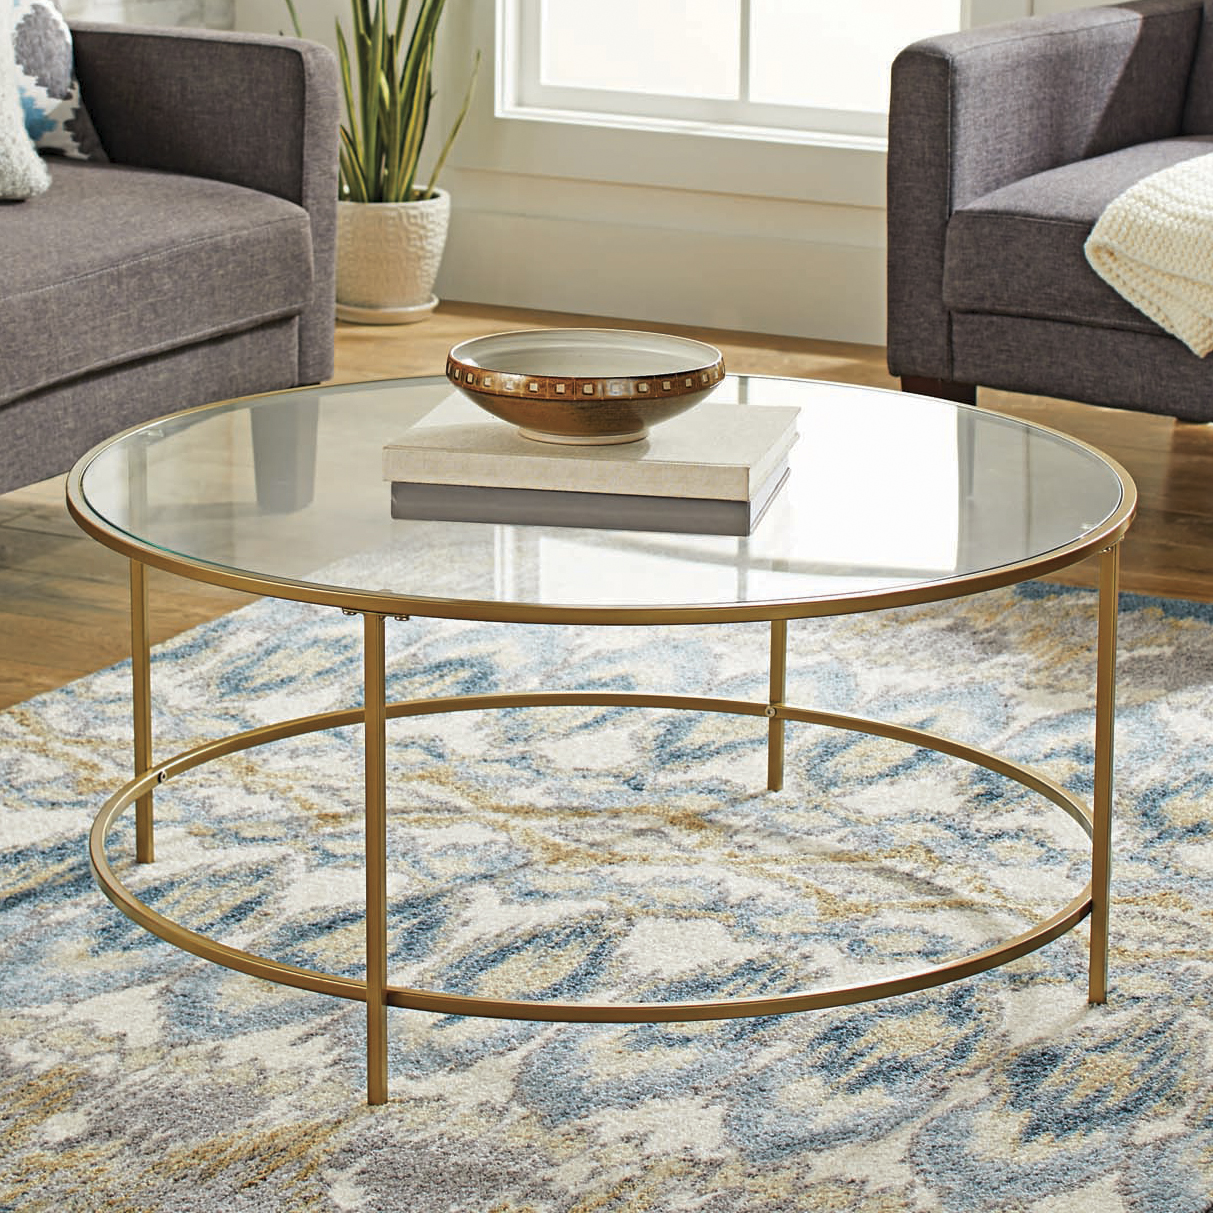 Better Homes & Gardens Nola Coffee Table, Gold Finish - image 1 of 10